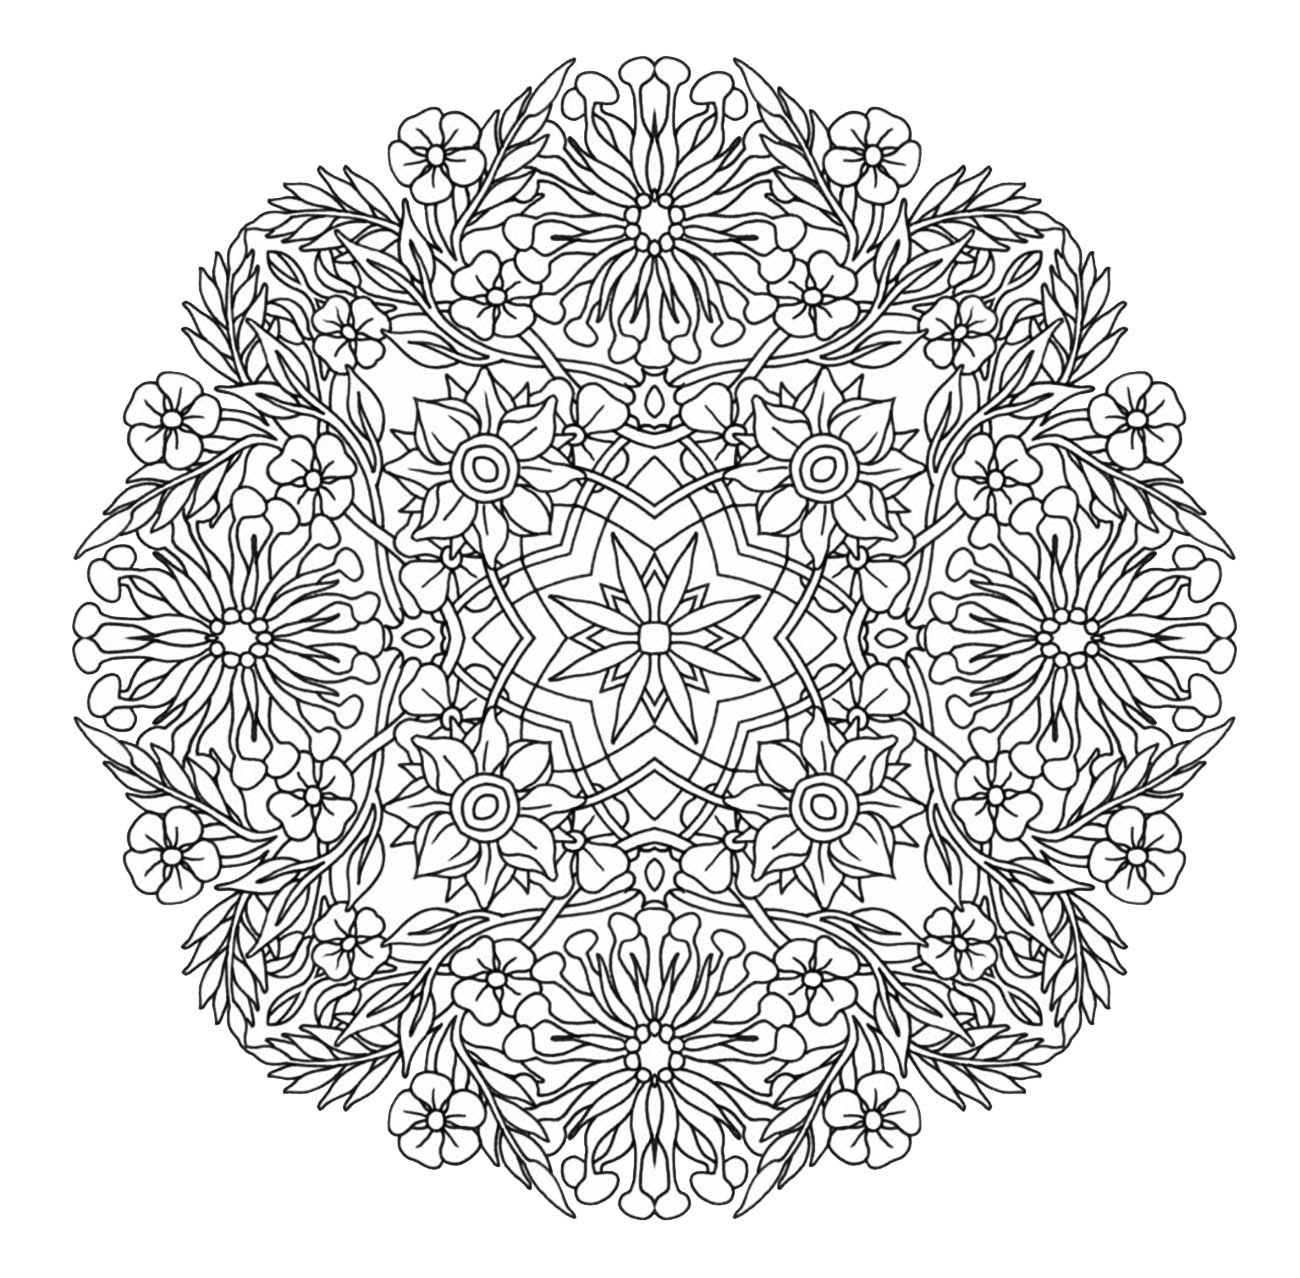 Mandala Coloring Books For Adults
 Mandala to in pdf 9 M&alas Adult Coloring Pages